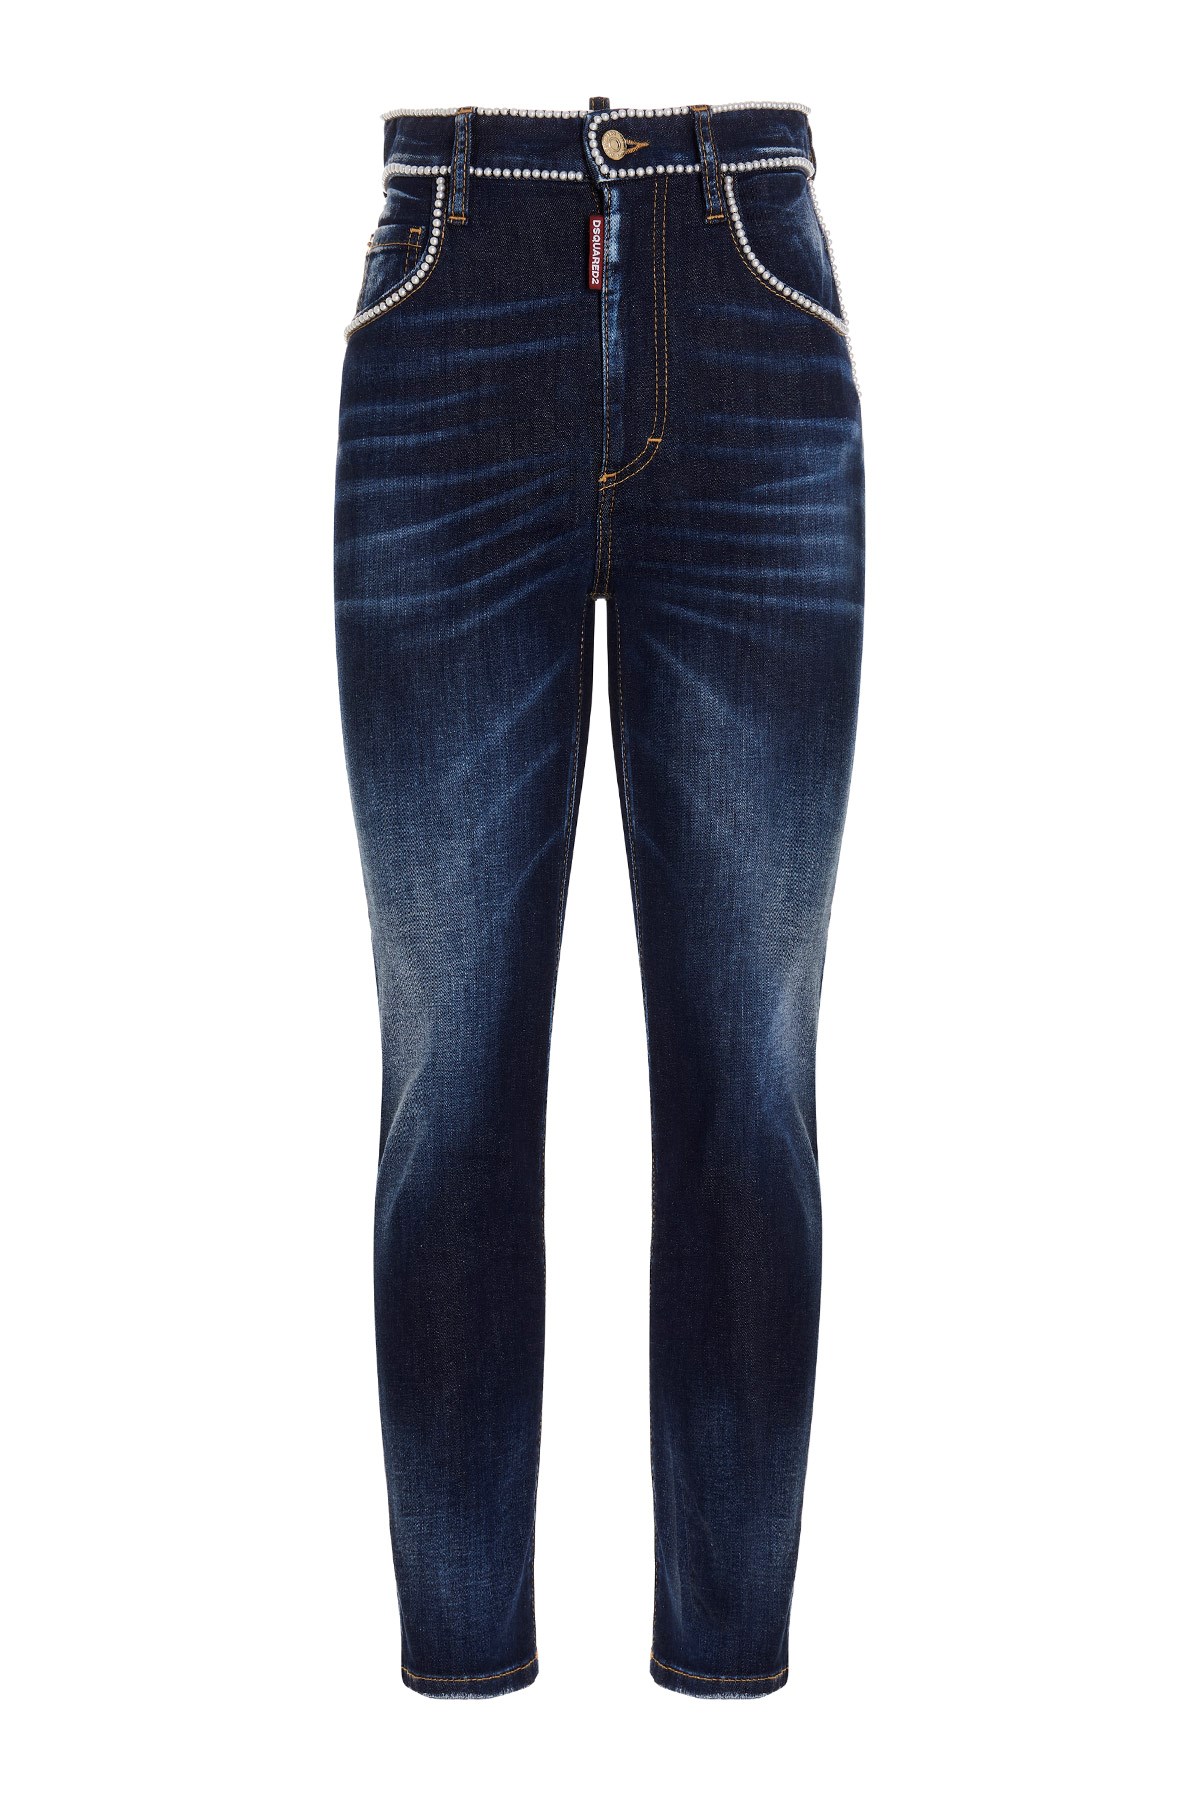 DSQUARED2 Jeans 'High Waist Cropped Twiggy Jean'